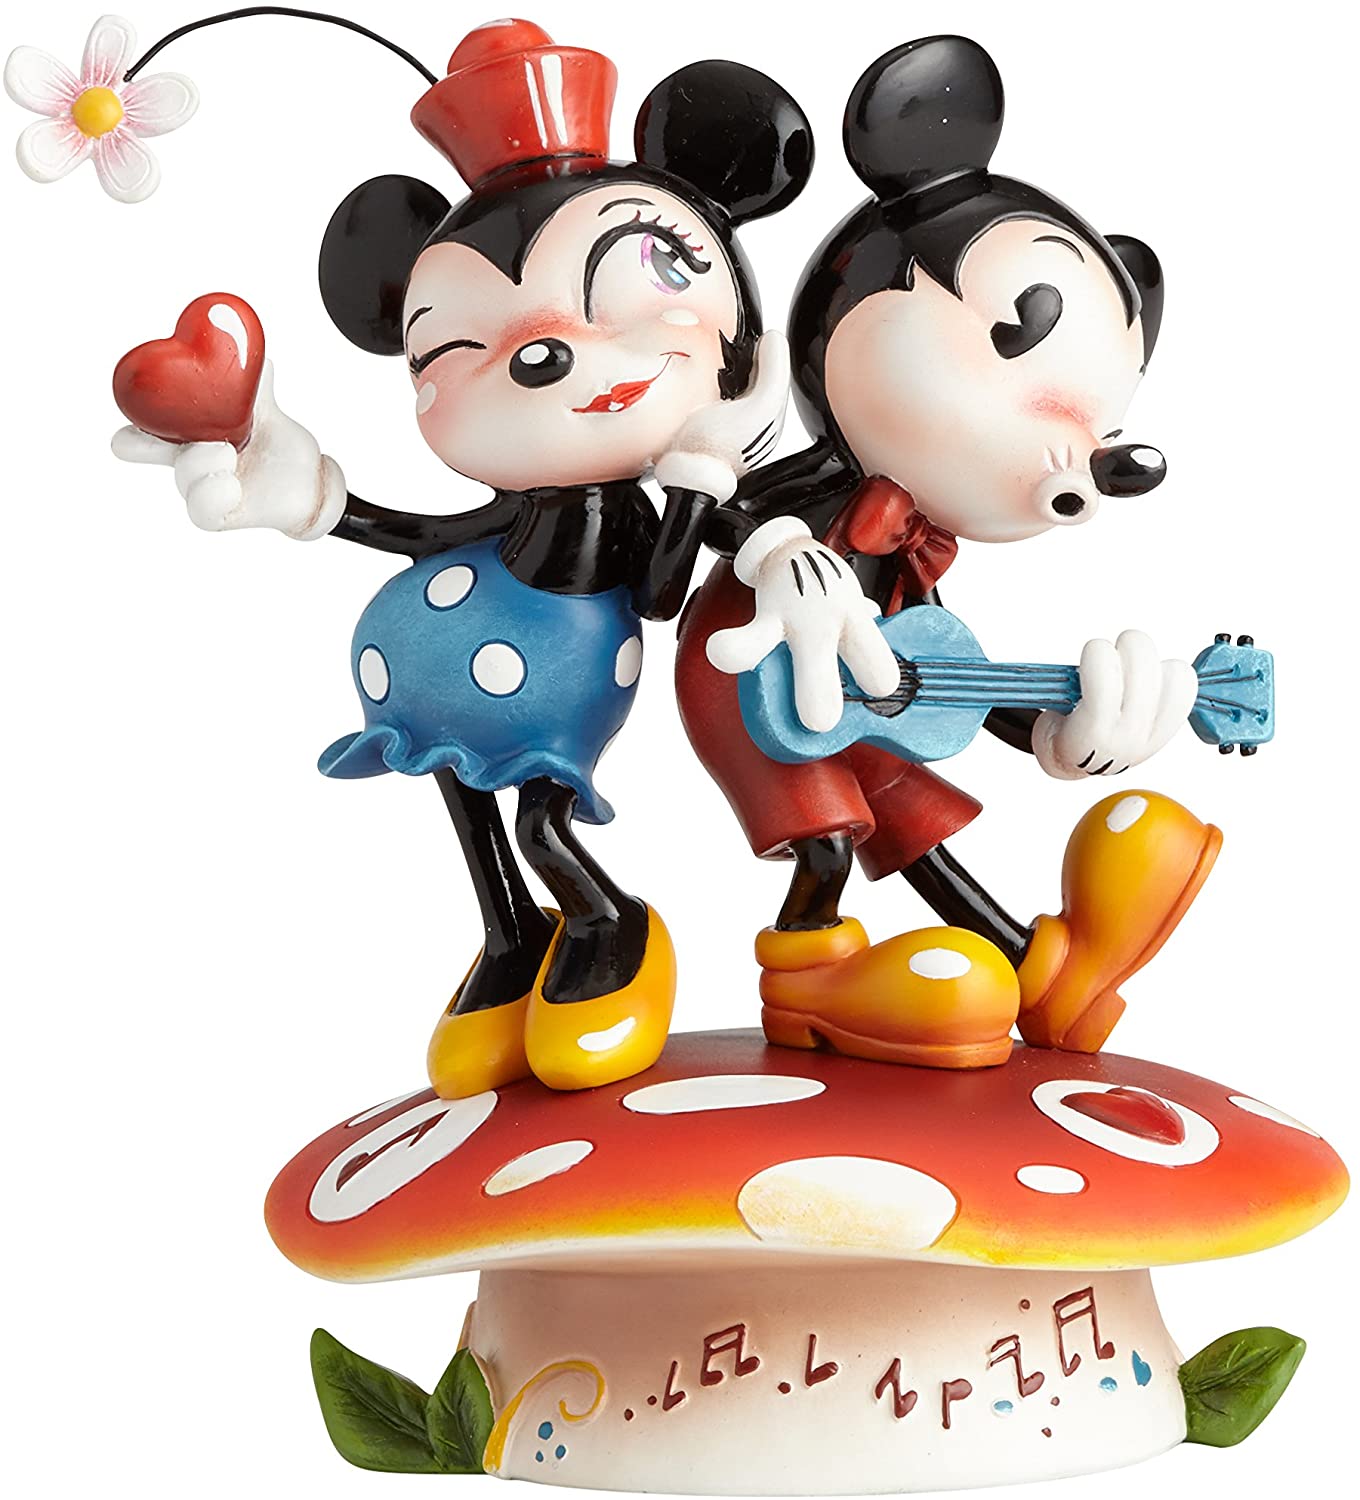 The World of Miss Mindy Mickey Mouse and Minnie Mouse Stone Resin Figurine